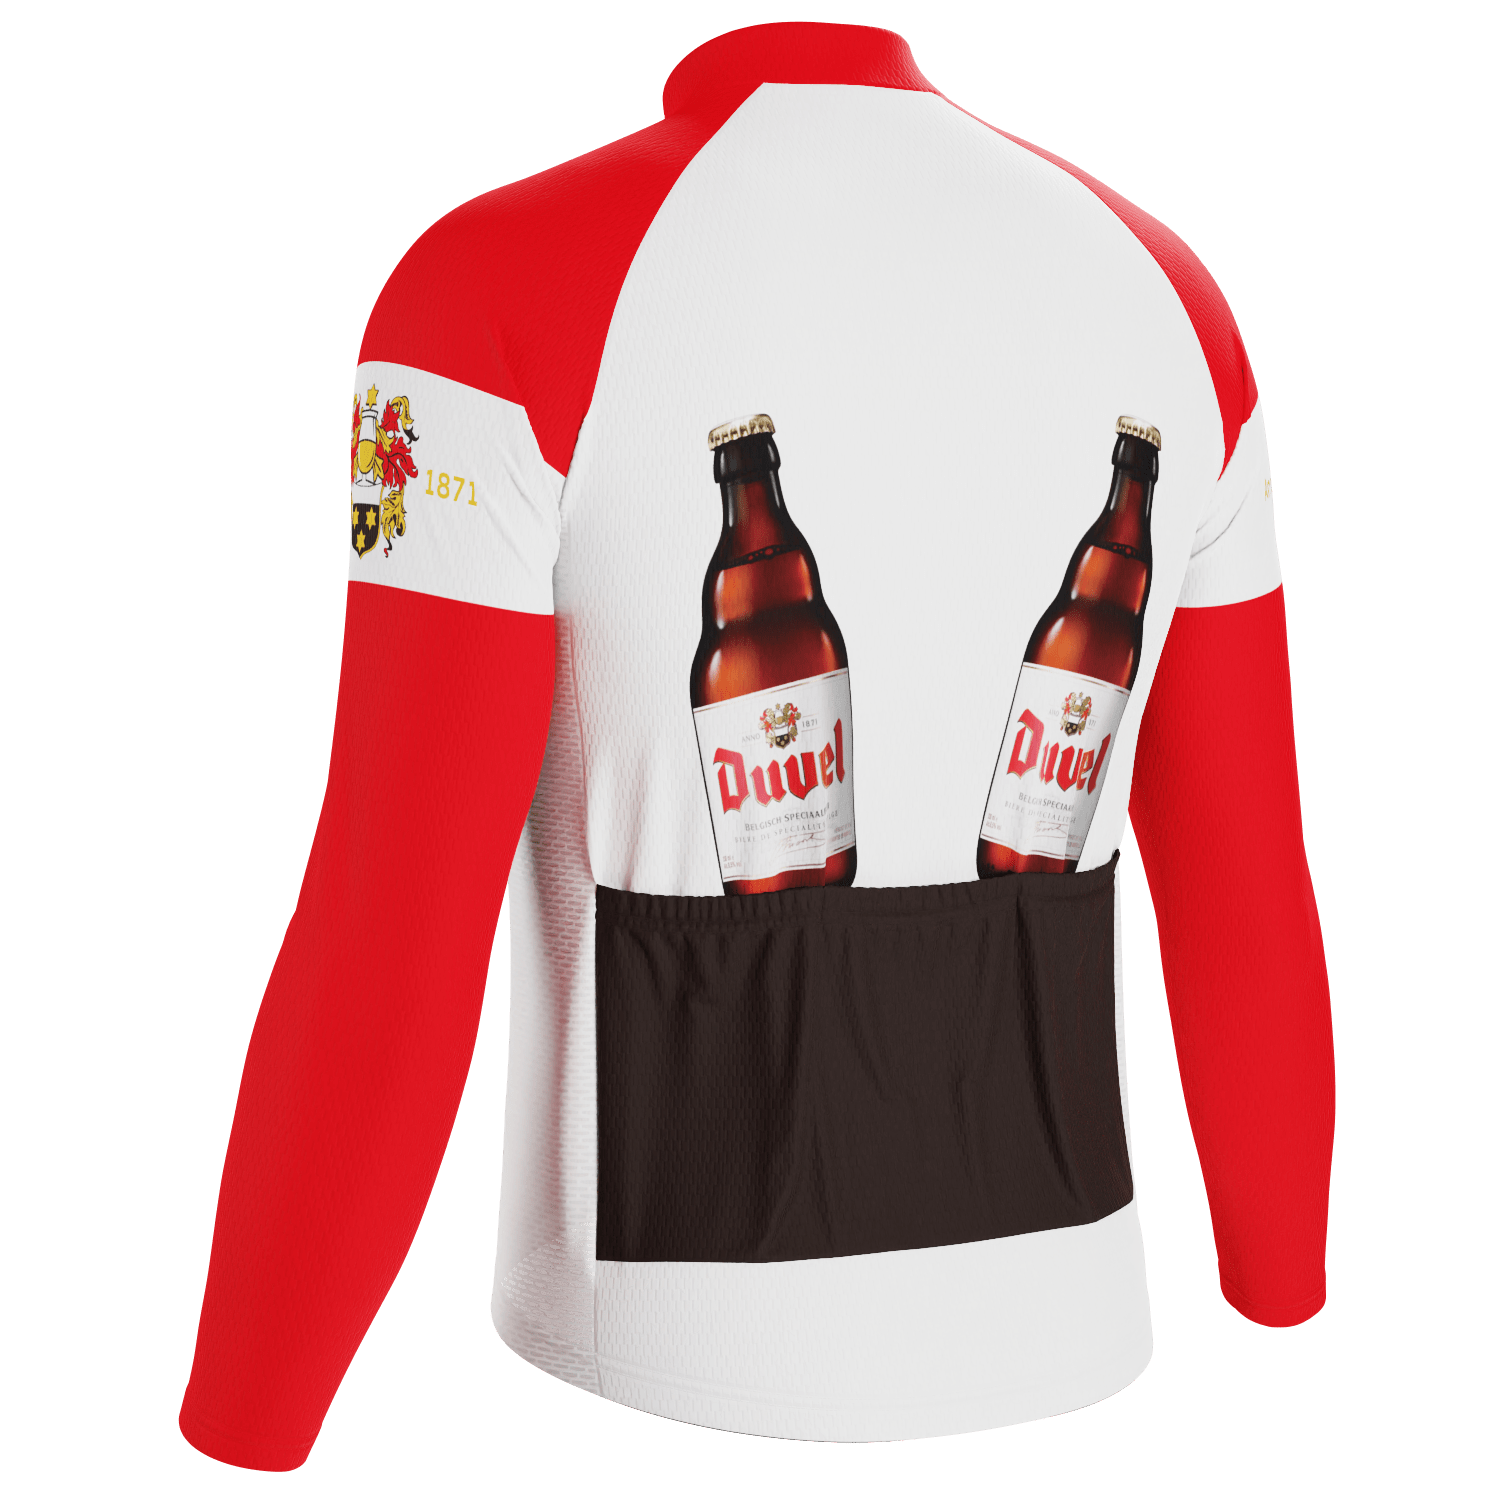 Men's Duvel Red Retro Long Sleeve Cycling Jersey